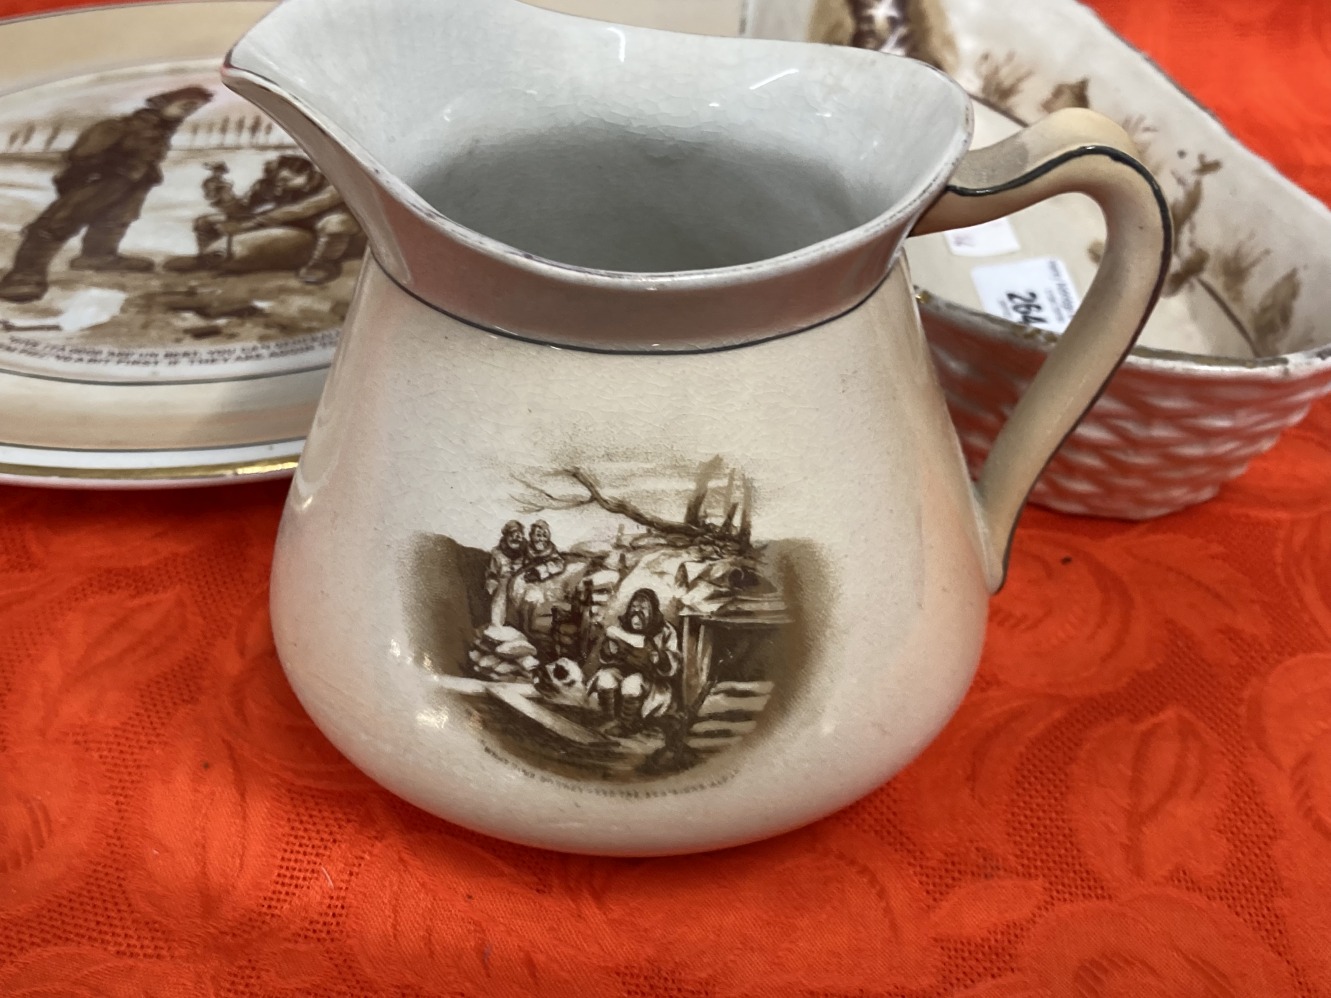 WWI Ceramics: Grimwades Bruce Bairnsfather ware pottery includes bon bon dishes, Old Bill plate 'I - Image 5 of 5